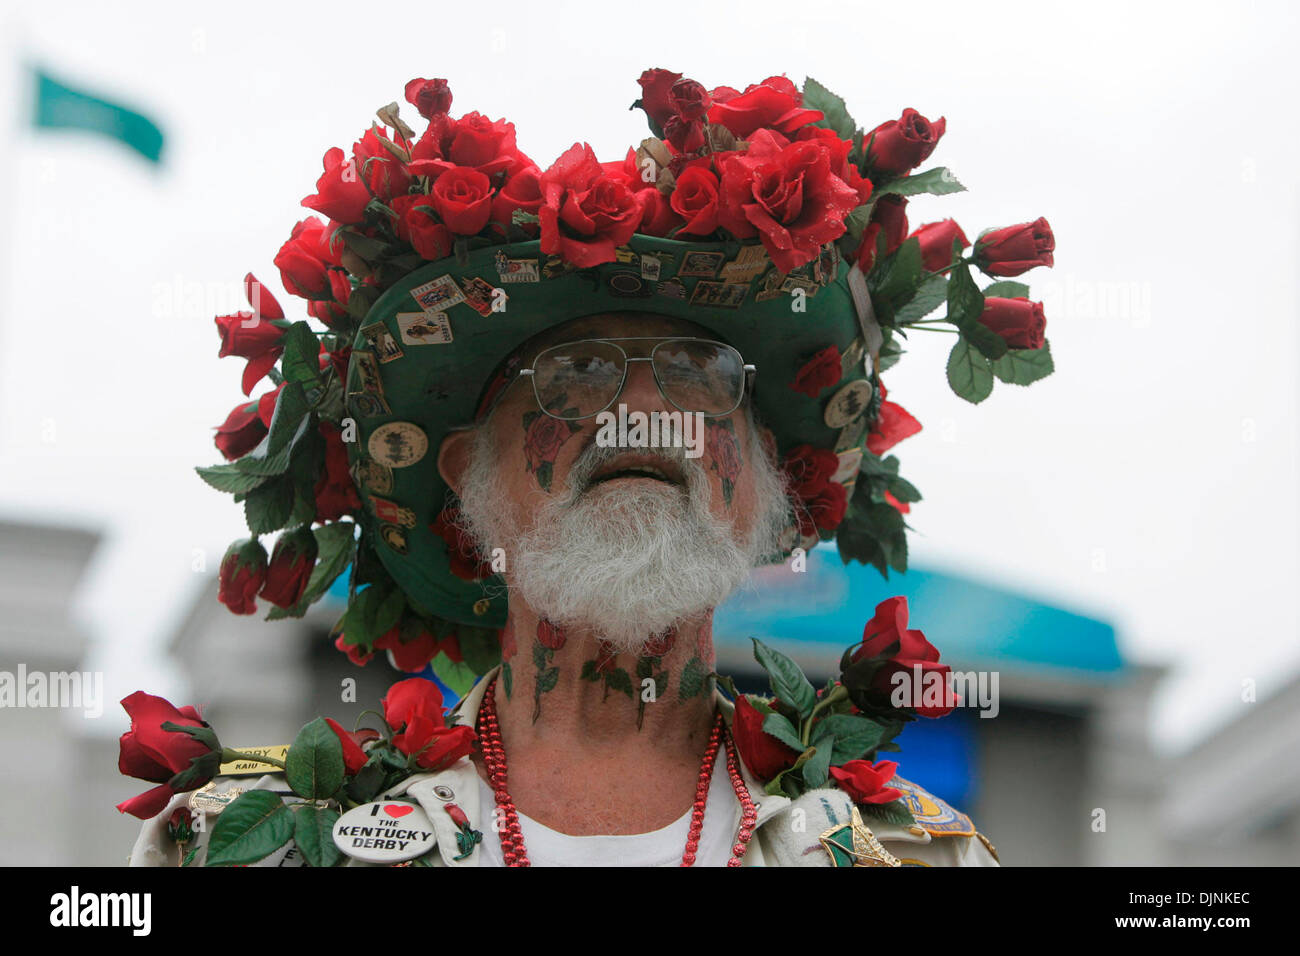 Charles M. Matasich, also known as Derby Man, from Proctorville, Oh., is attending his 41st Derby at the 134th running of the Kentucky Derby Saturday May 3, 2008, at Churchill Downs, Louisville, Ky. Photo by Tim Gruber  (Credit Image: © Lexington Herald Leader/ZUMA Press) Stock Photo